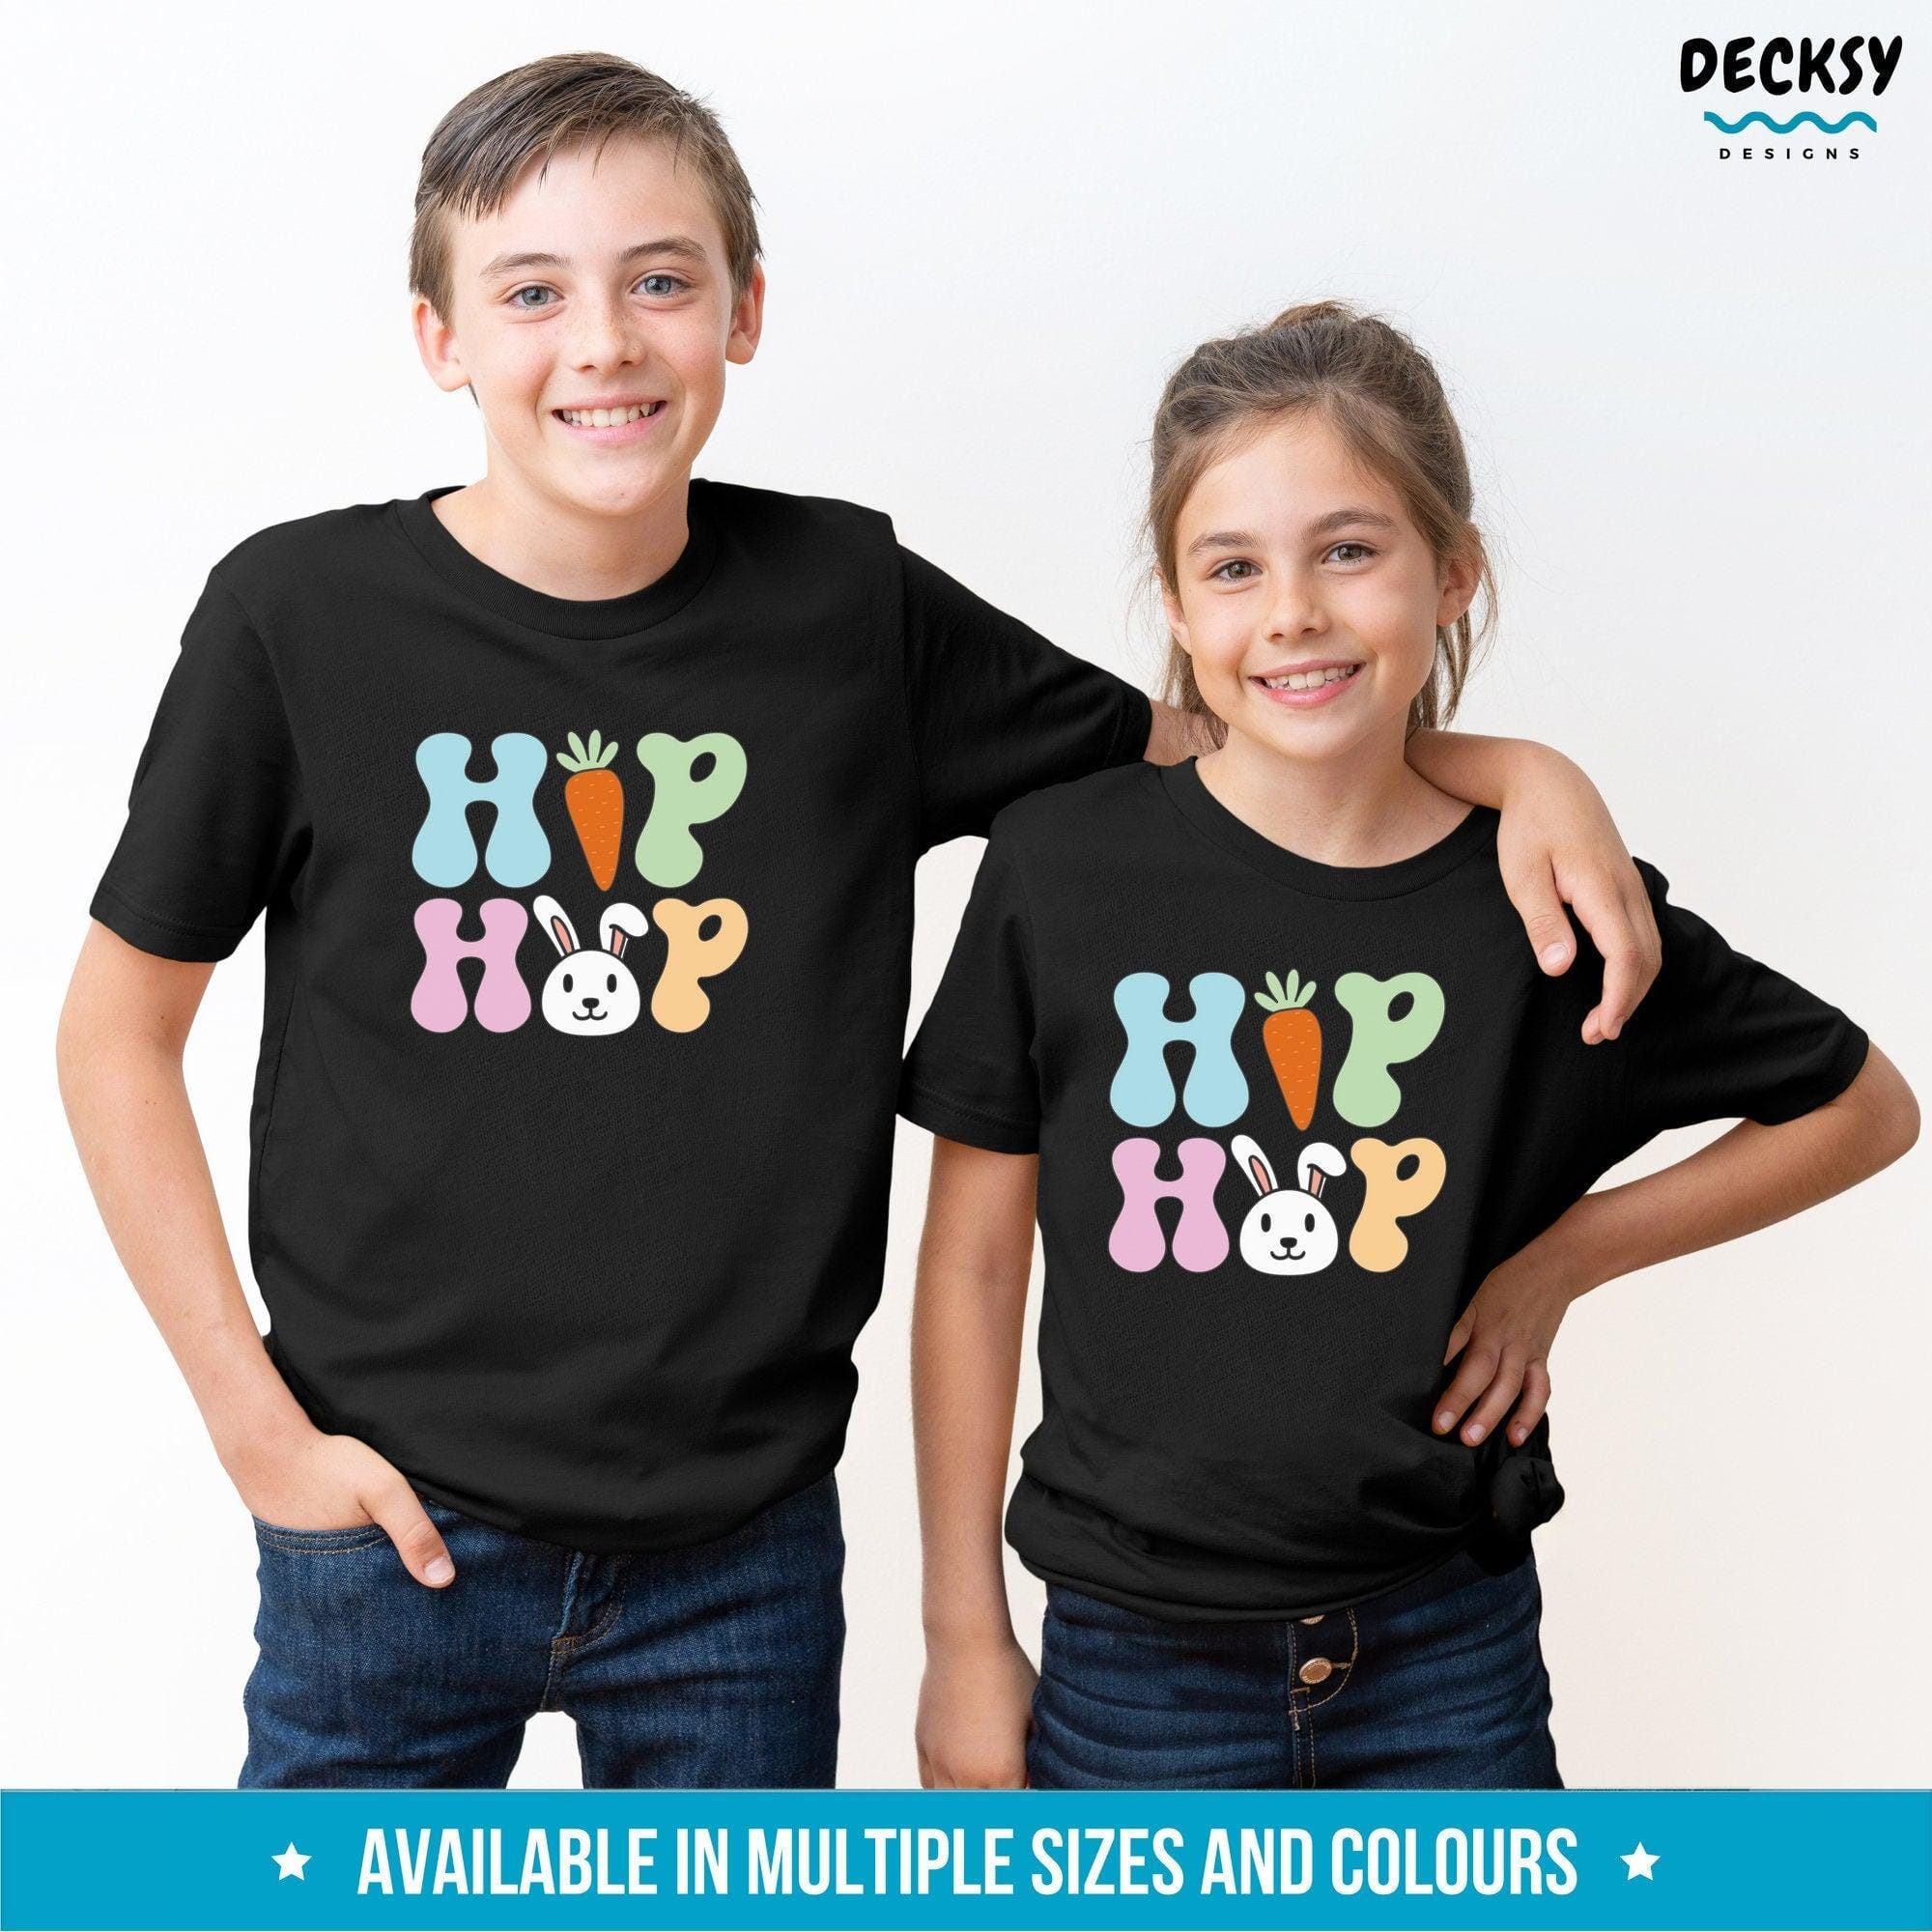 Hip Hop Bunny Easter Tshirt, Rabbit Lover Gift-Clothing:Gender-Neutral Adult Clothing:Tops & Tees:T-shirts:Graphic Tees-DecksyDesigns